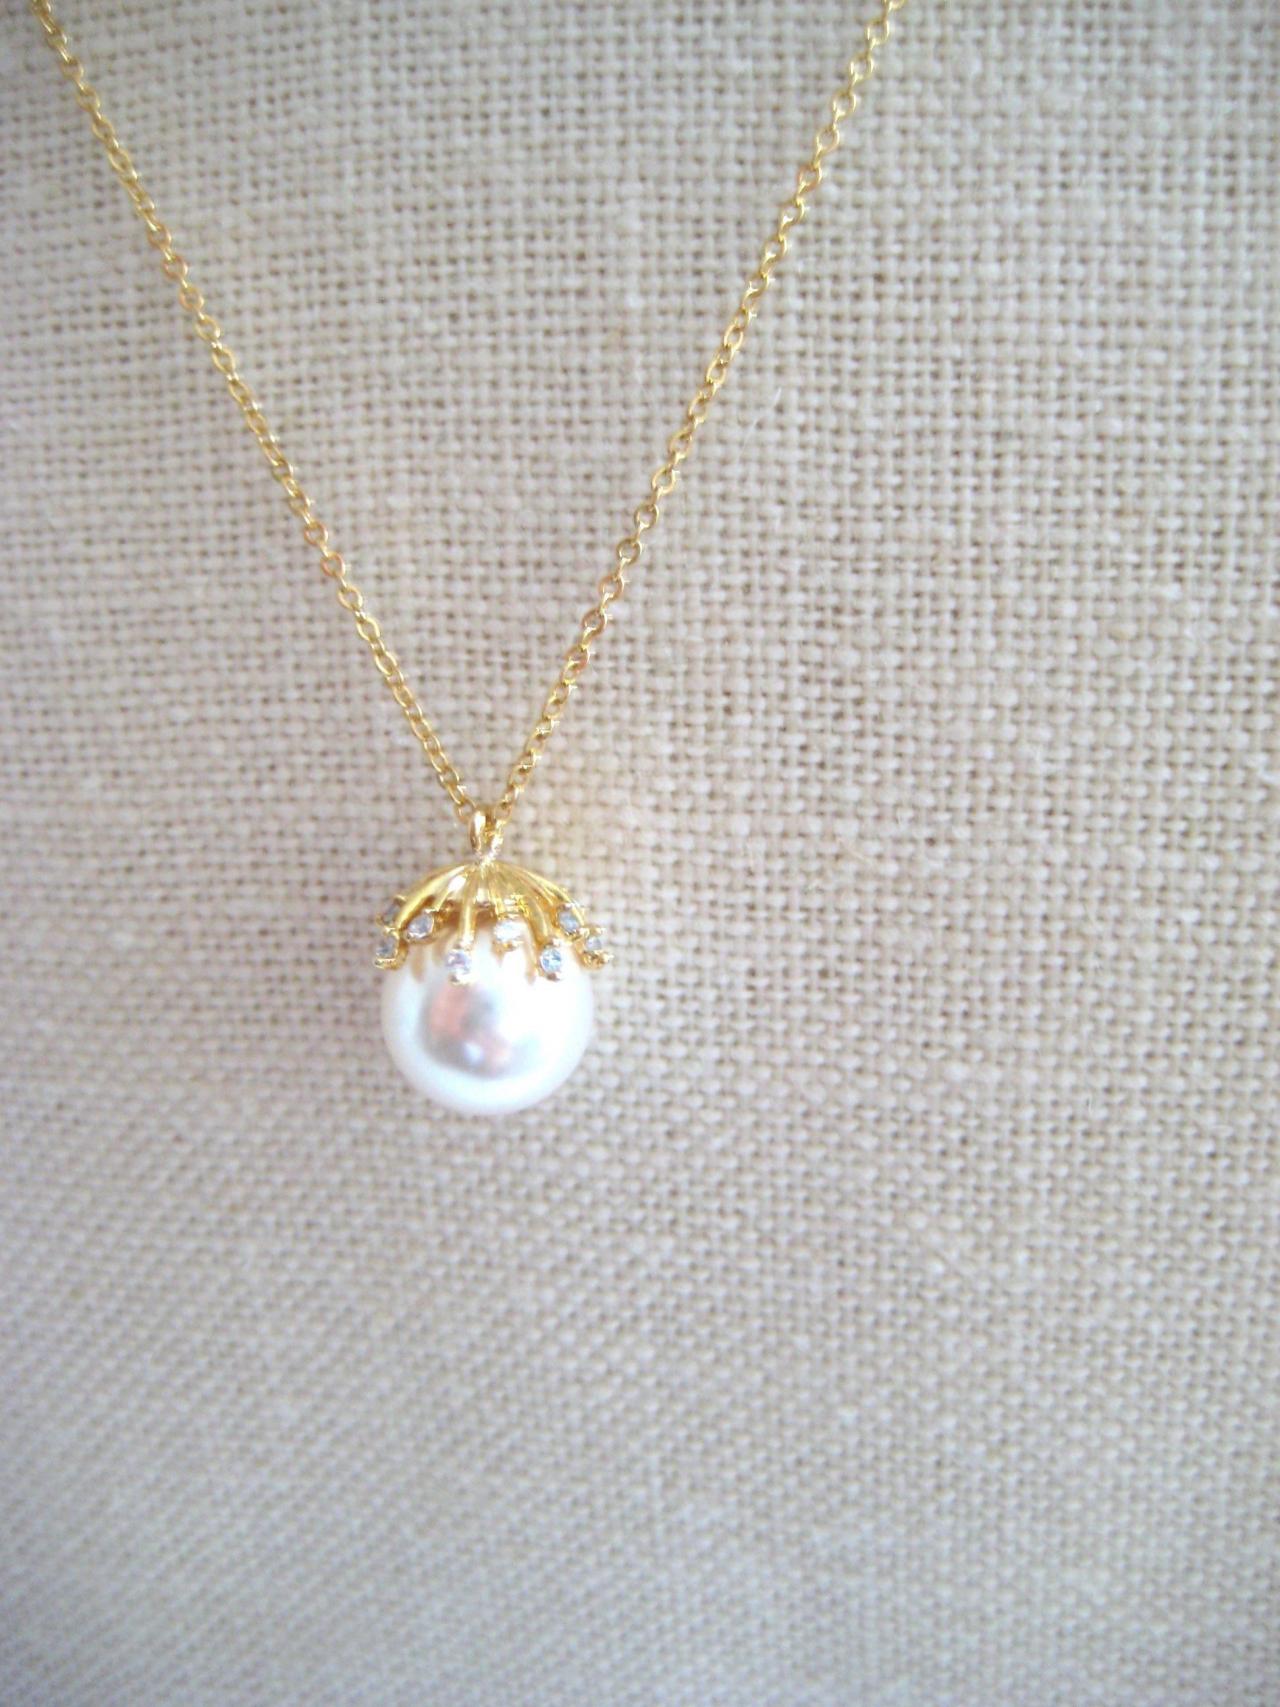 Bridal Pearl Necklace Gold Starburst Charm Necklace Wedding Pearl Jewelry Swarovski 10mm Pearl Bridesmaid Gift Single Pearl Necklace (n301)